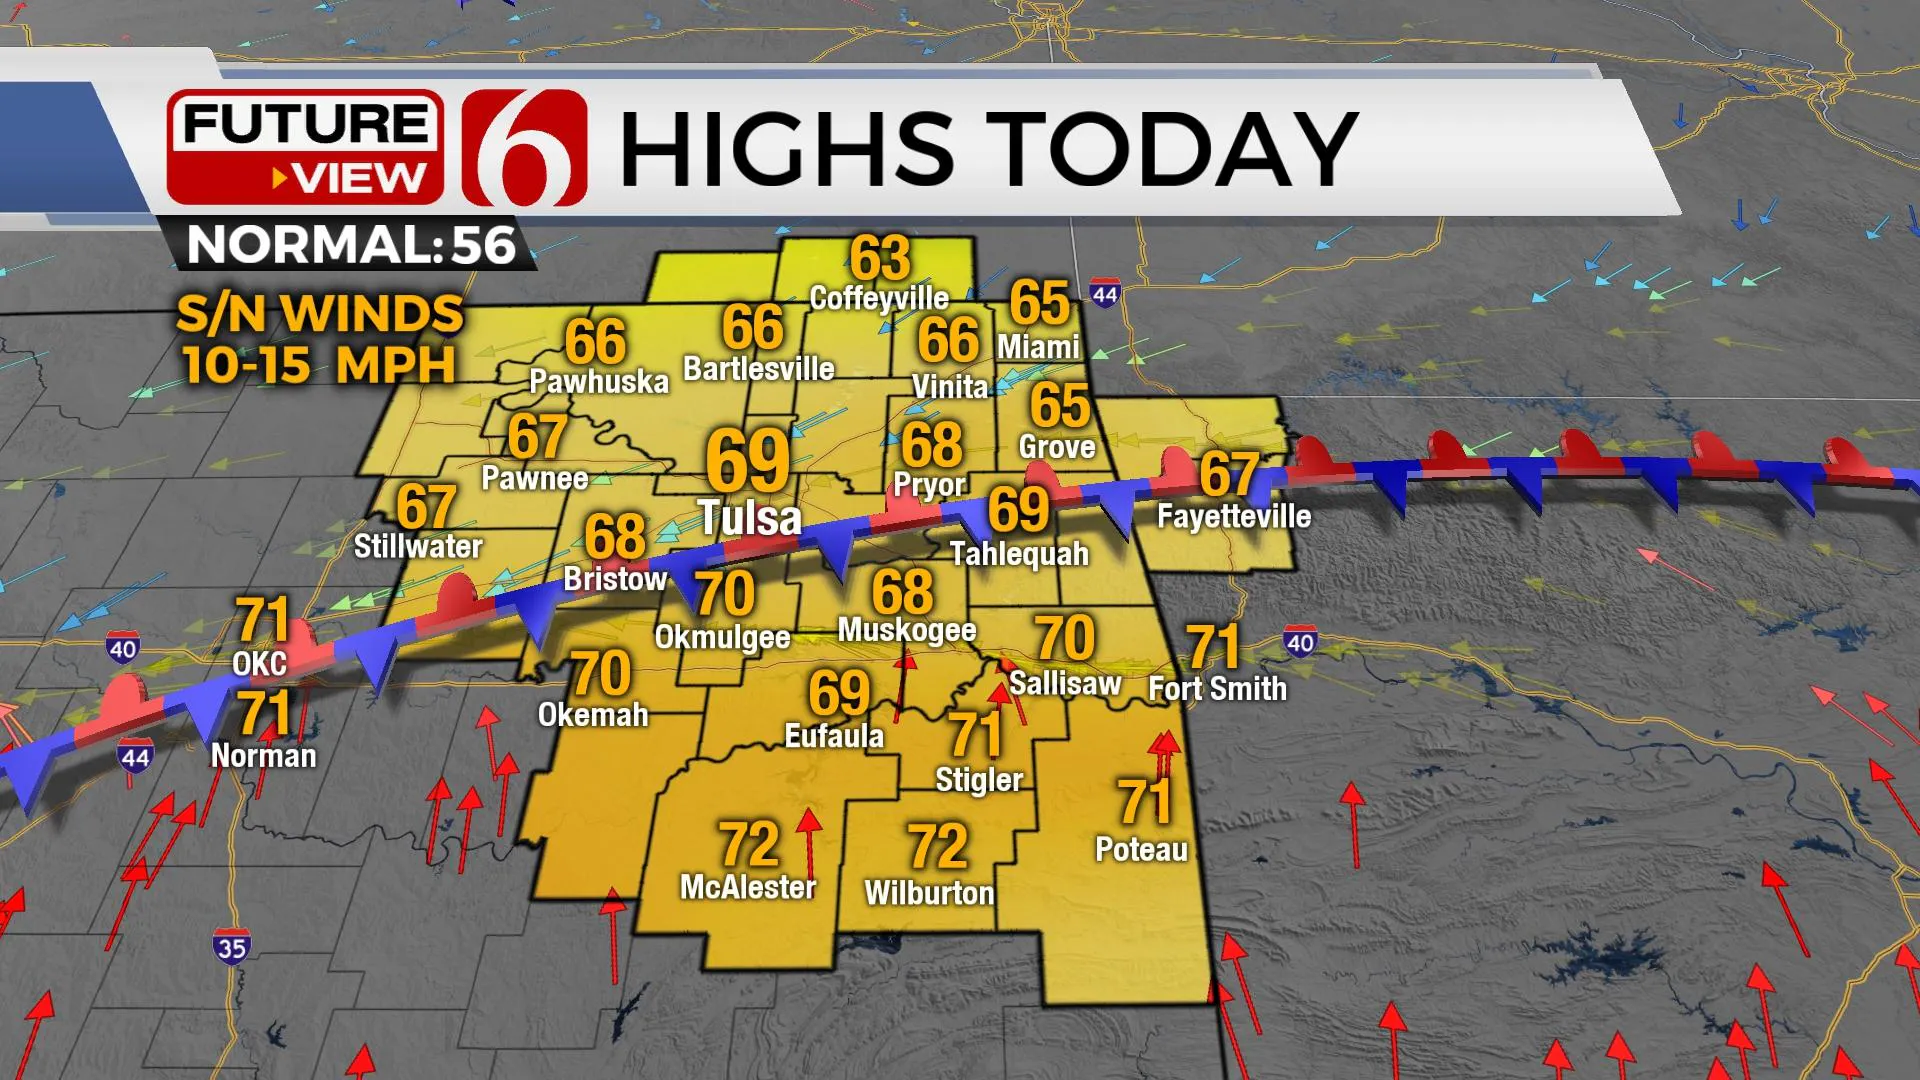 Tuesday Highs